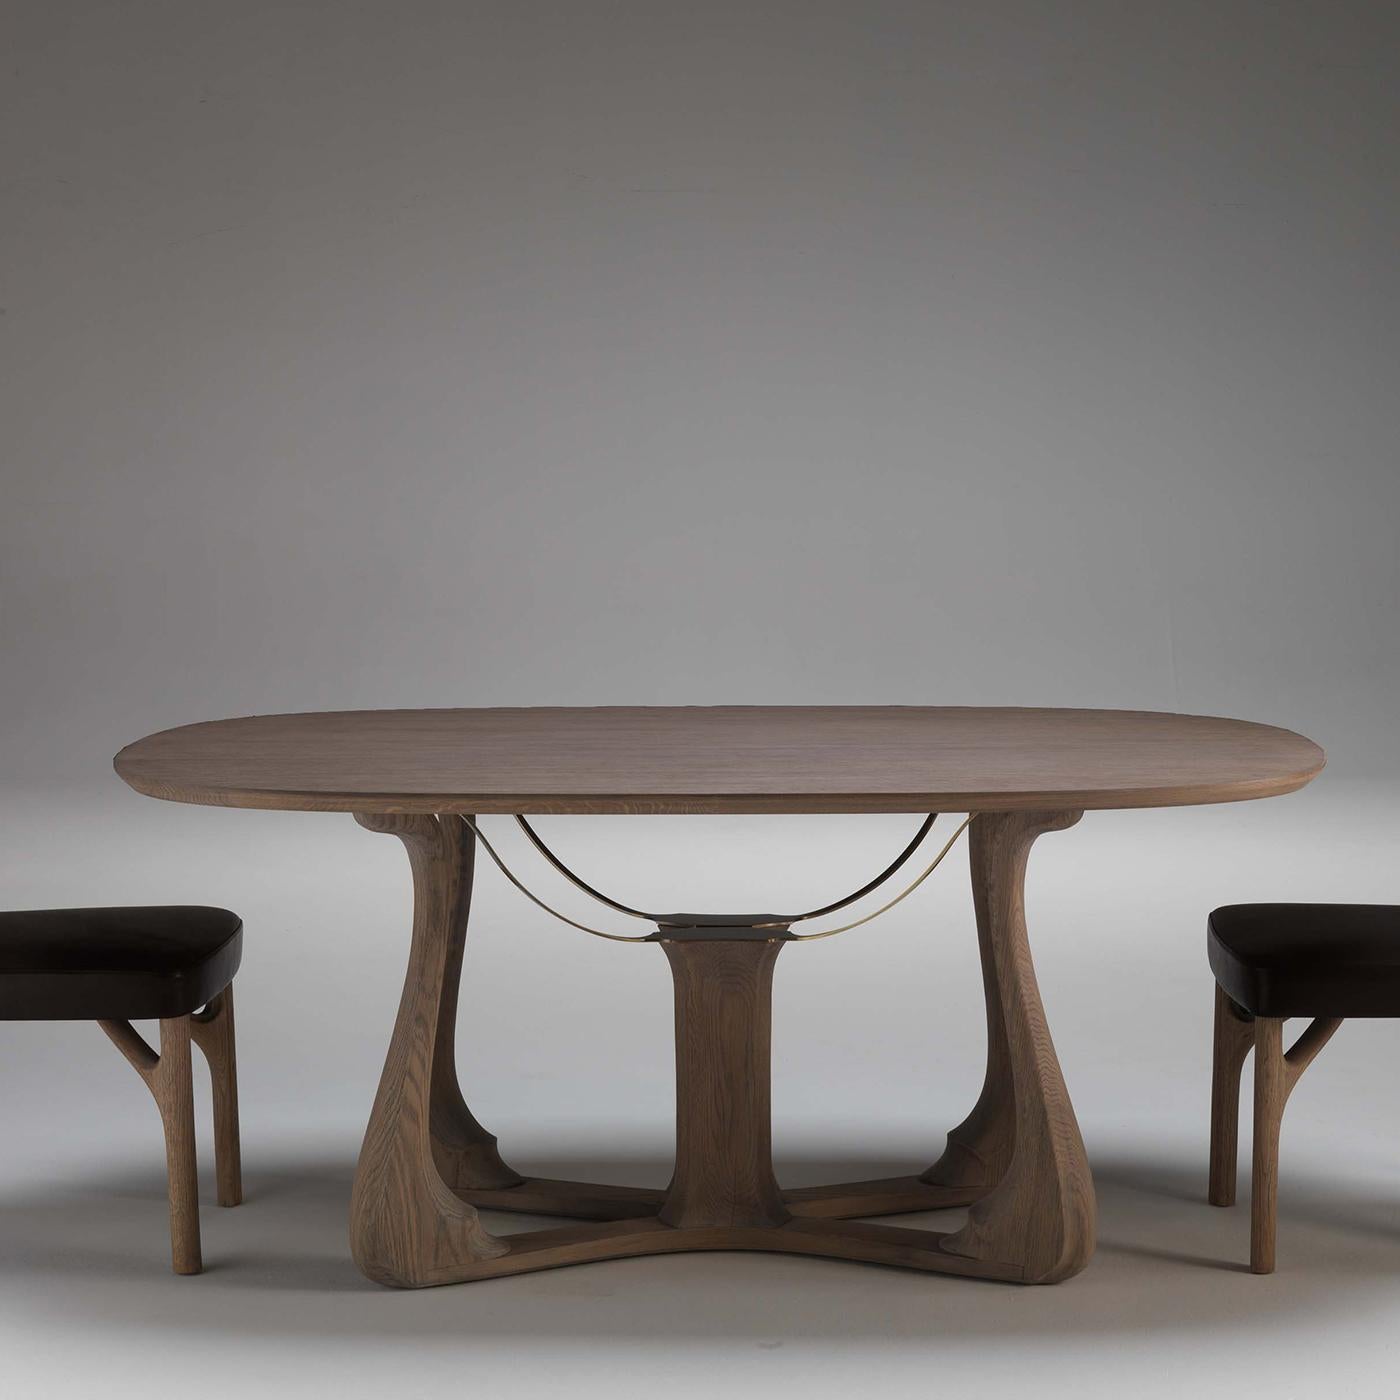 The stunning base of this dining table evokes the body of a harp, hence its name in Italian. Entirely made of oak wood, its four sinuous legs cross at the center, giving a serene and elegant look to the piece. From the central element four metal